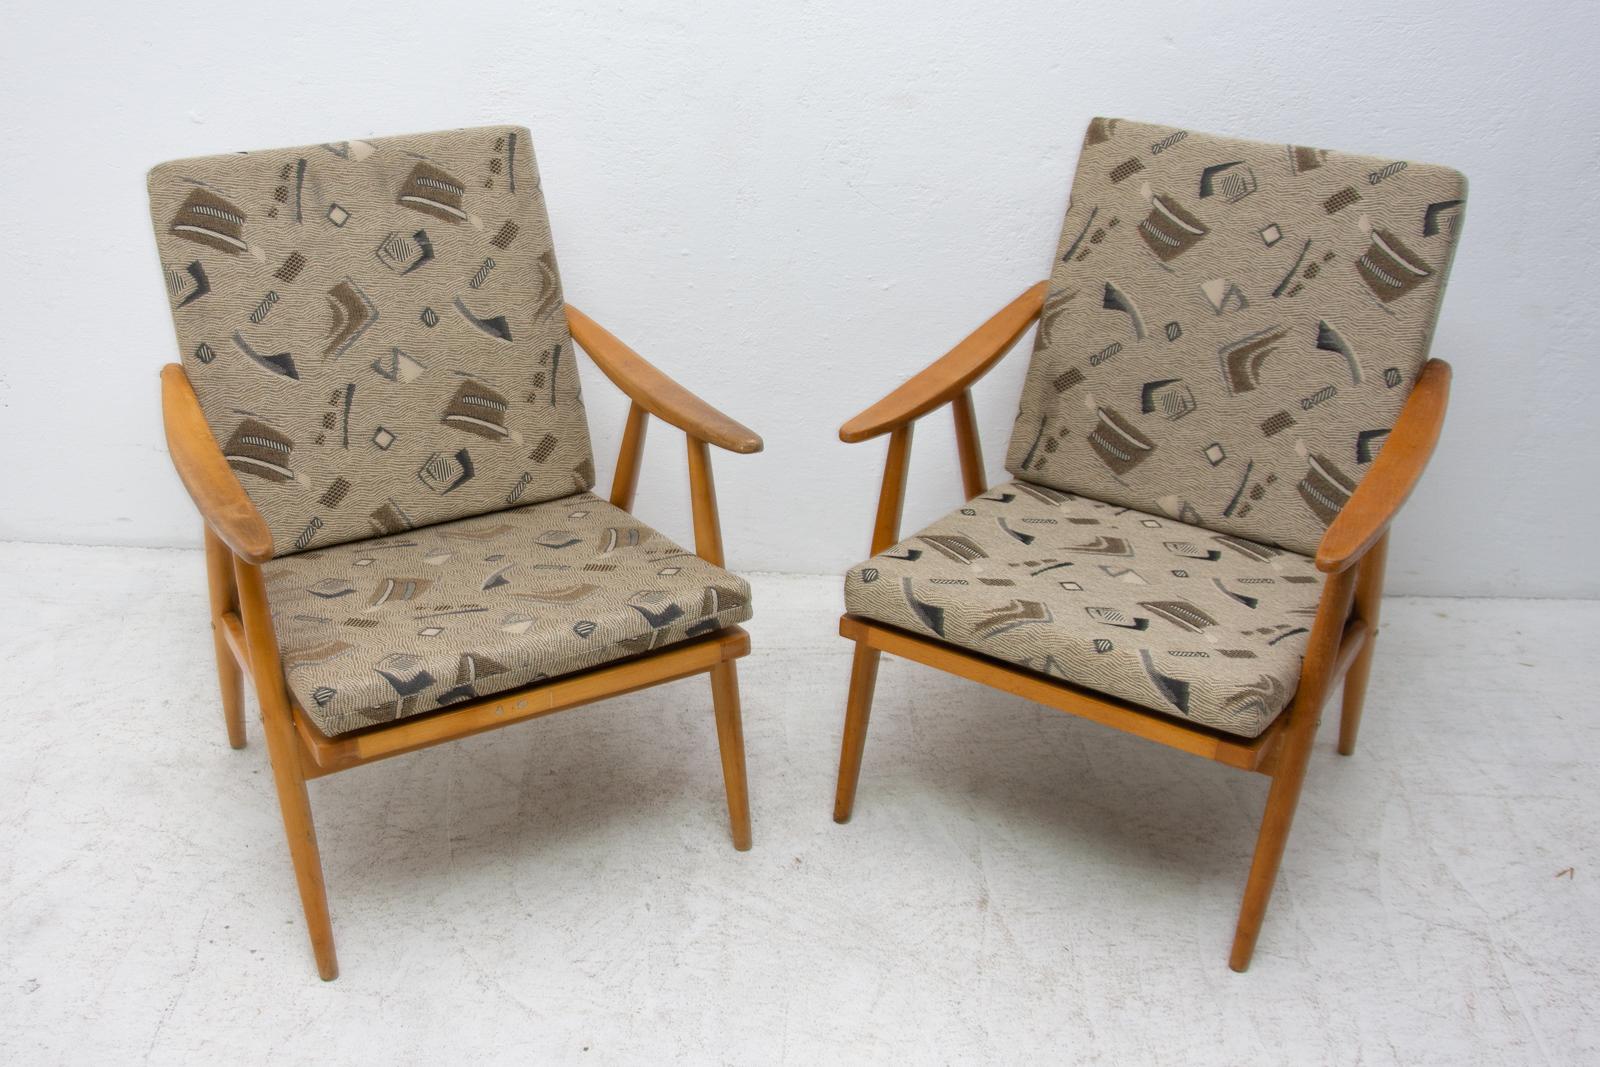 These armchairs were designed by Jaroslav Šmídek for TON company and made in the former Czechoslovakia in the 1970s. They are made of beechwood.

The chairs are stable and comfortable, the springs under the seat are firm and stable.

The chairs